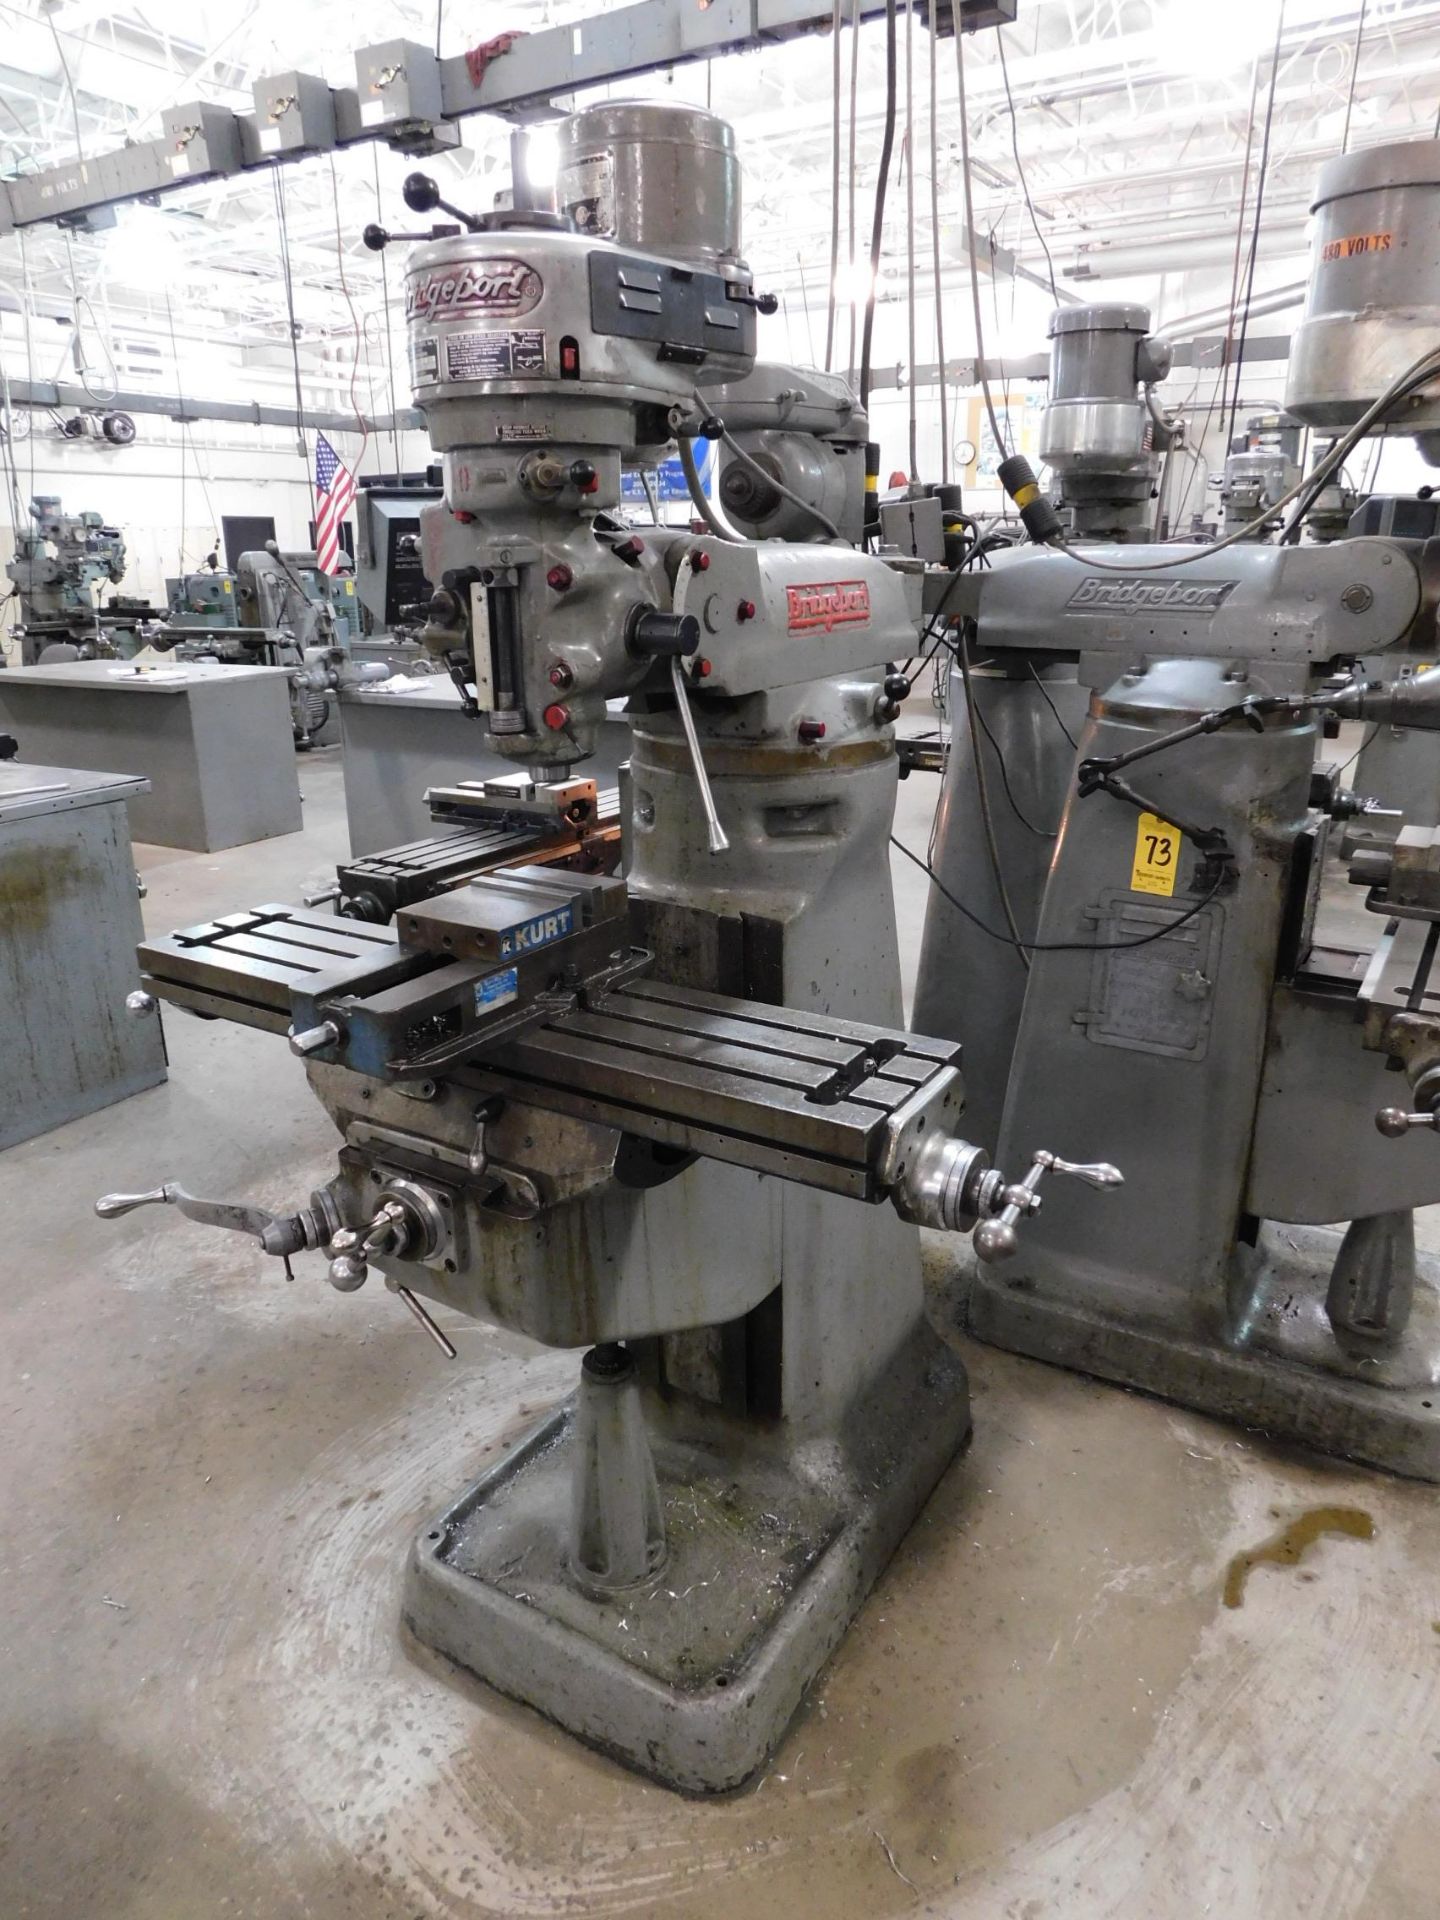 Bridgeport Step Pulley Vertical Mill, SN BR32917, 9" x 42" Table, Bridgeport Shaping Attachment,